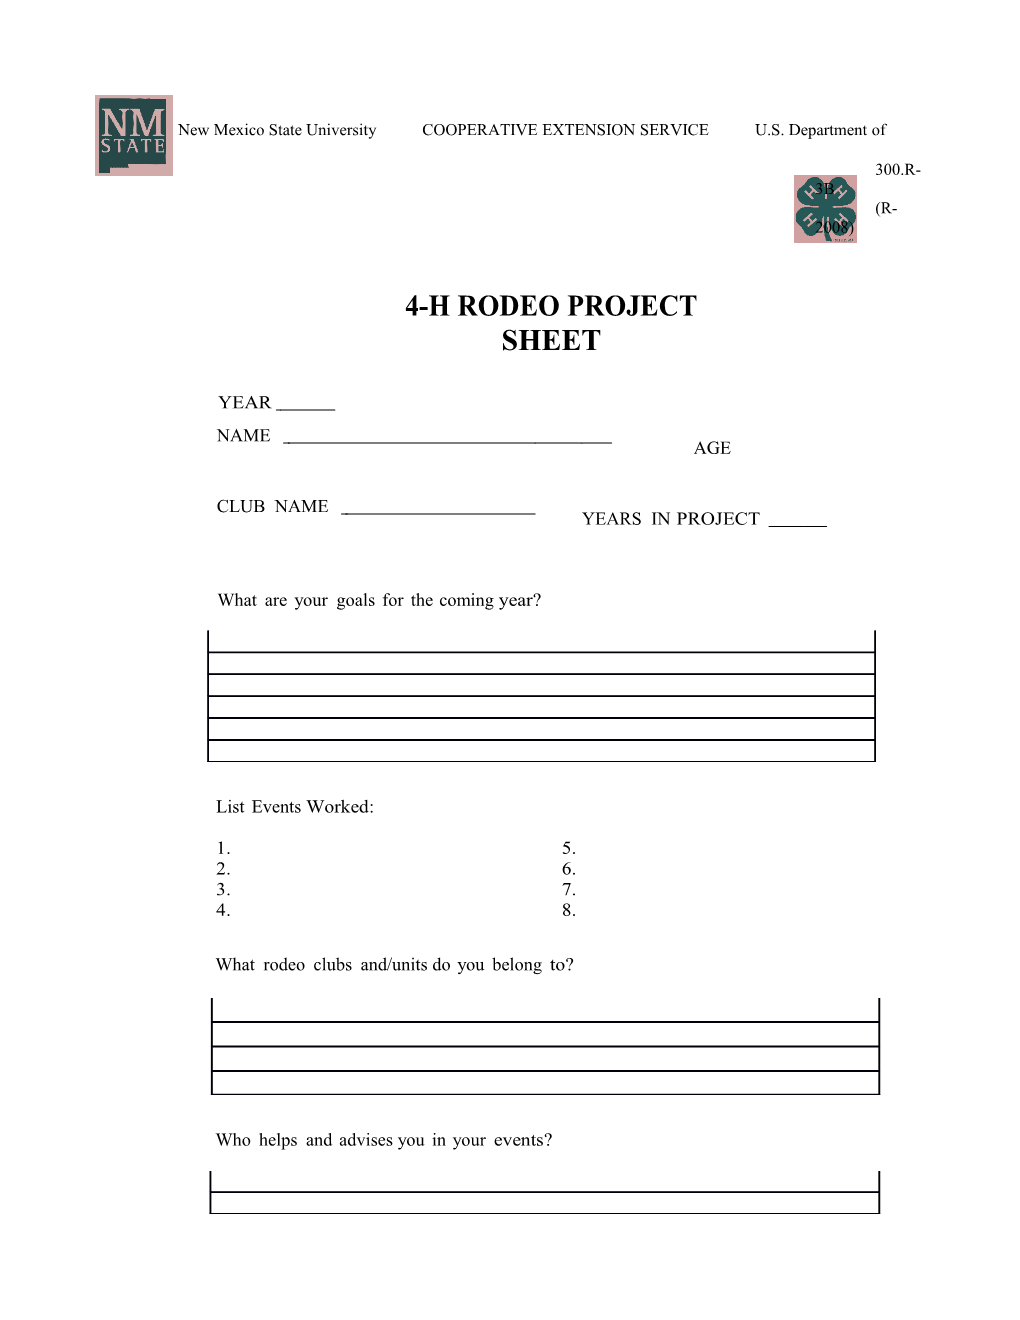 4-H Rodeo Project Sheet